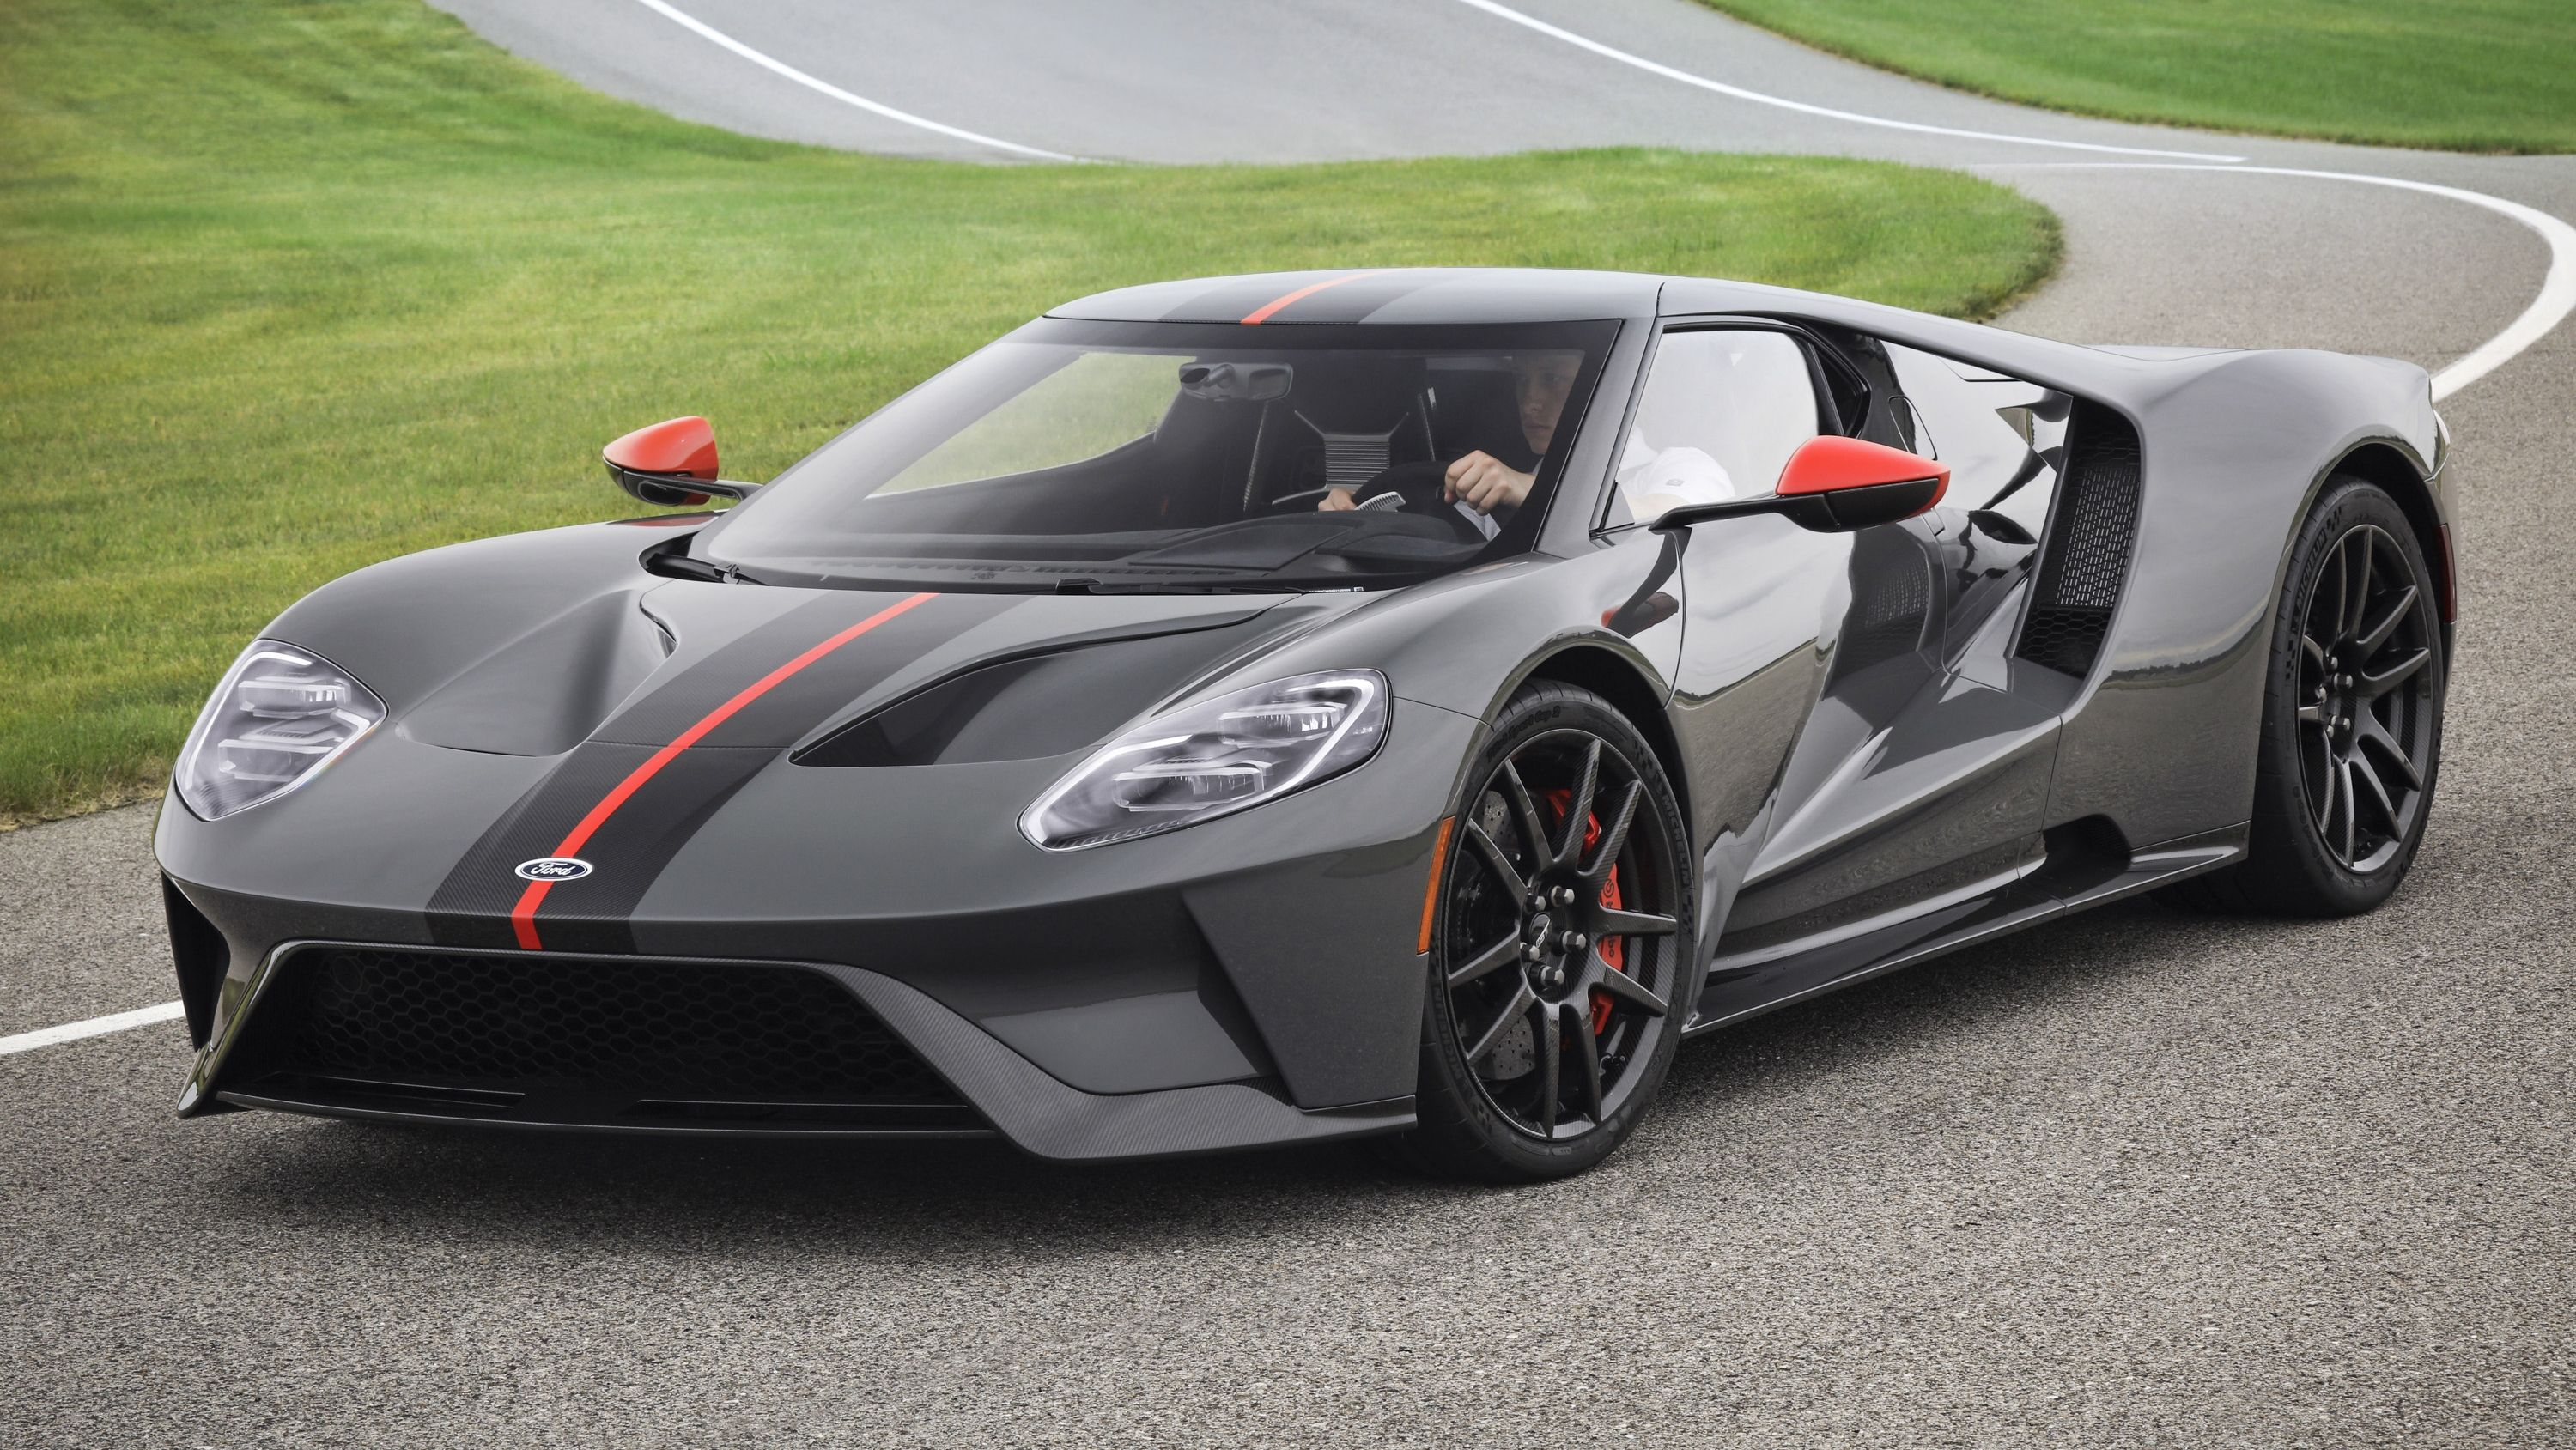 Ford GT Carbon Series Picture, Photo, Wallpaper